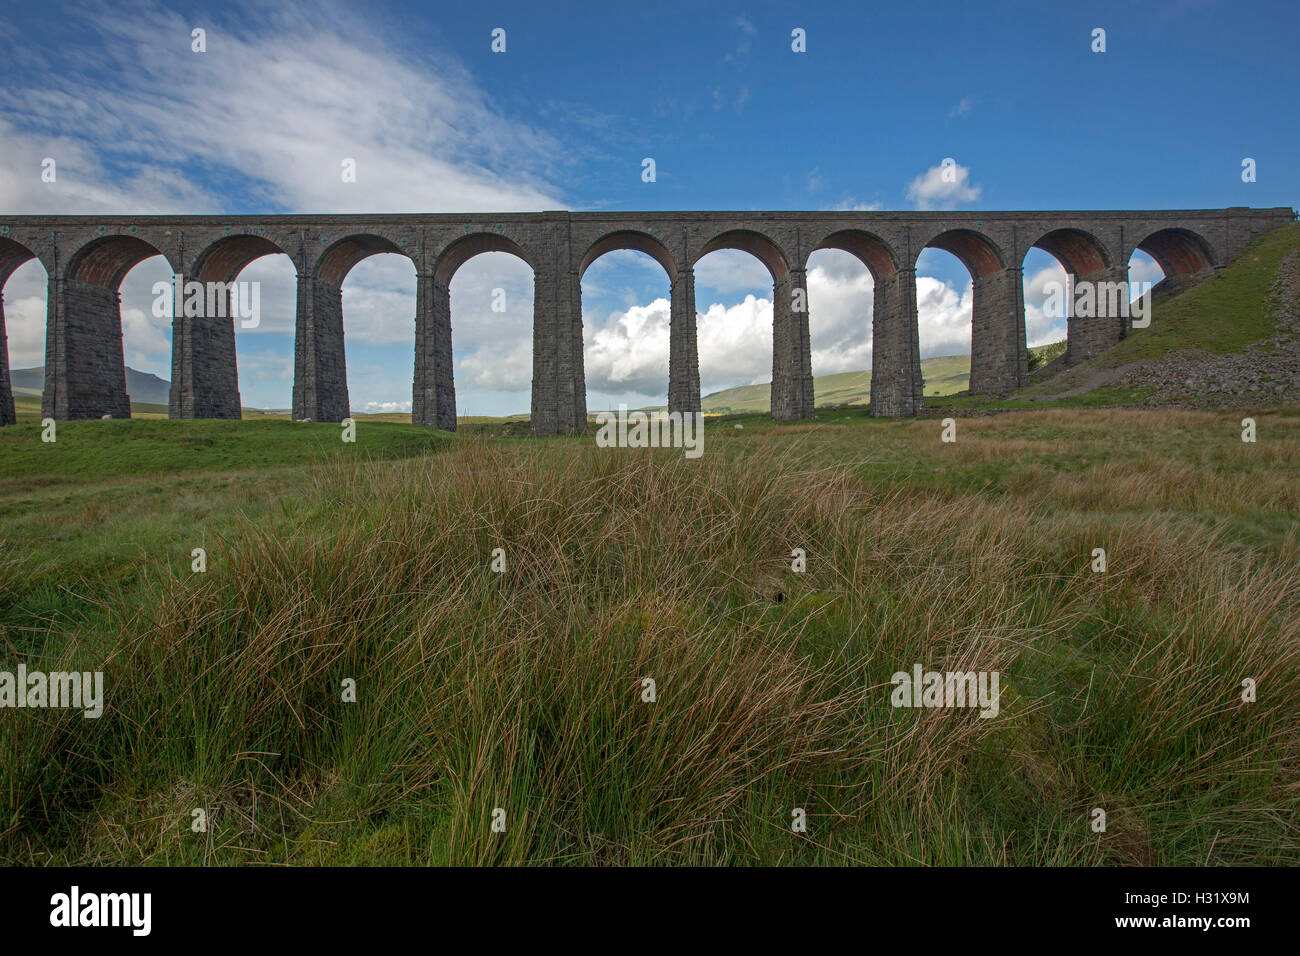 Historic long & high Ripplehead viaduct stretching across Yorkshire moors with grasses in foreground and under blue sky in England Stock Photo